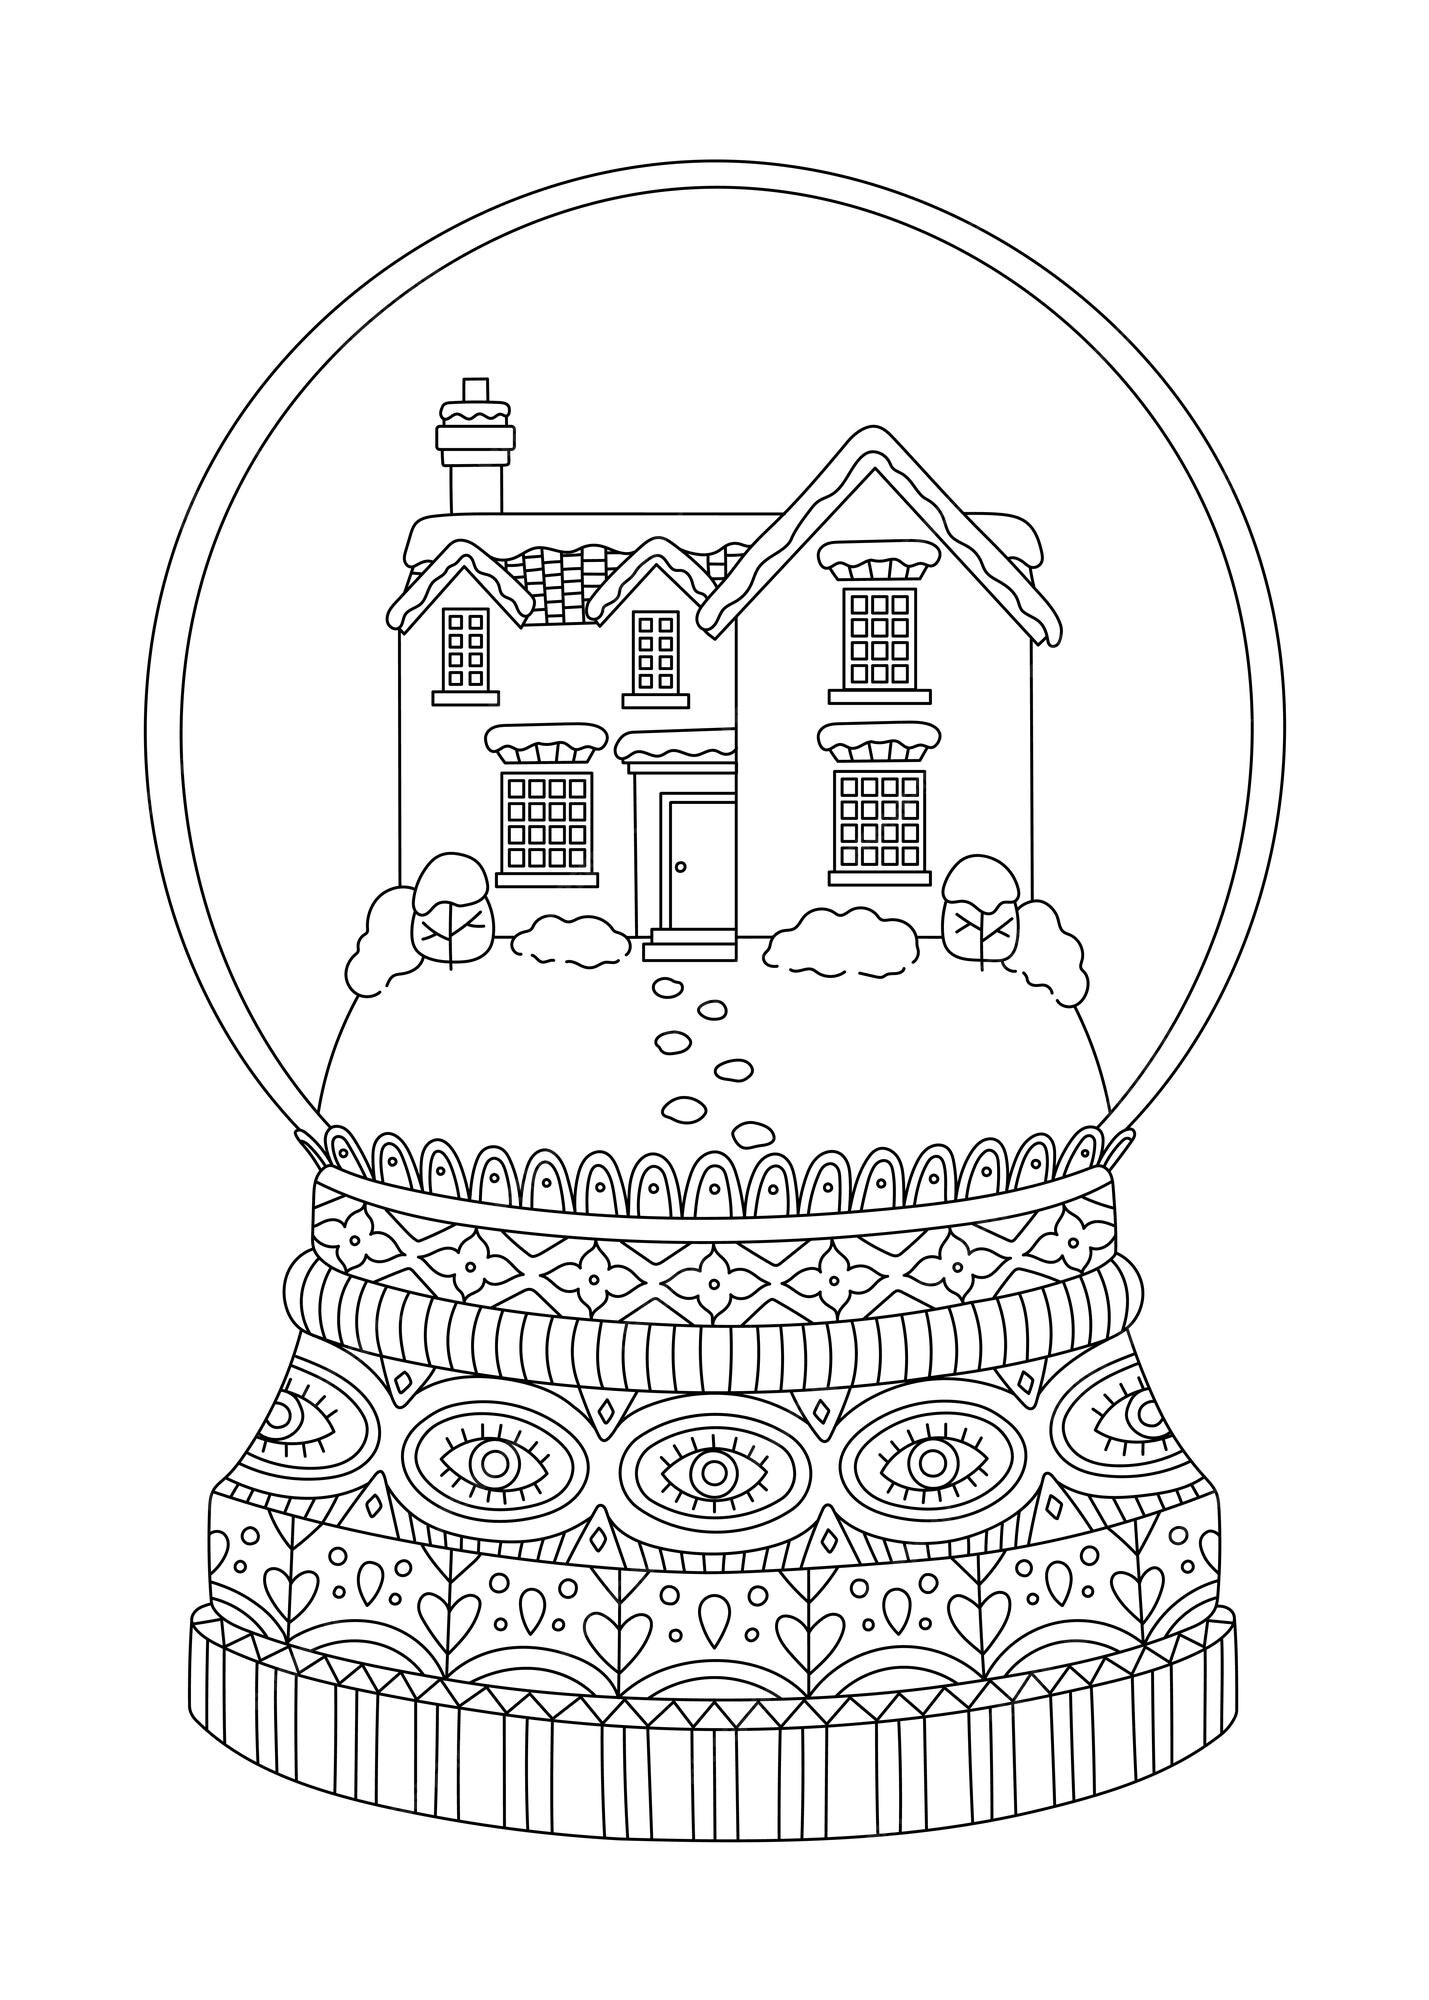 Premium vector snow globe coloring page outline design christmas ball isolated on white background vector